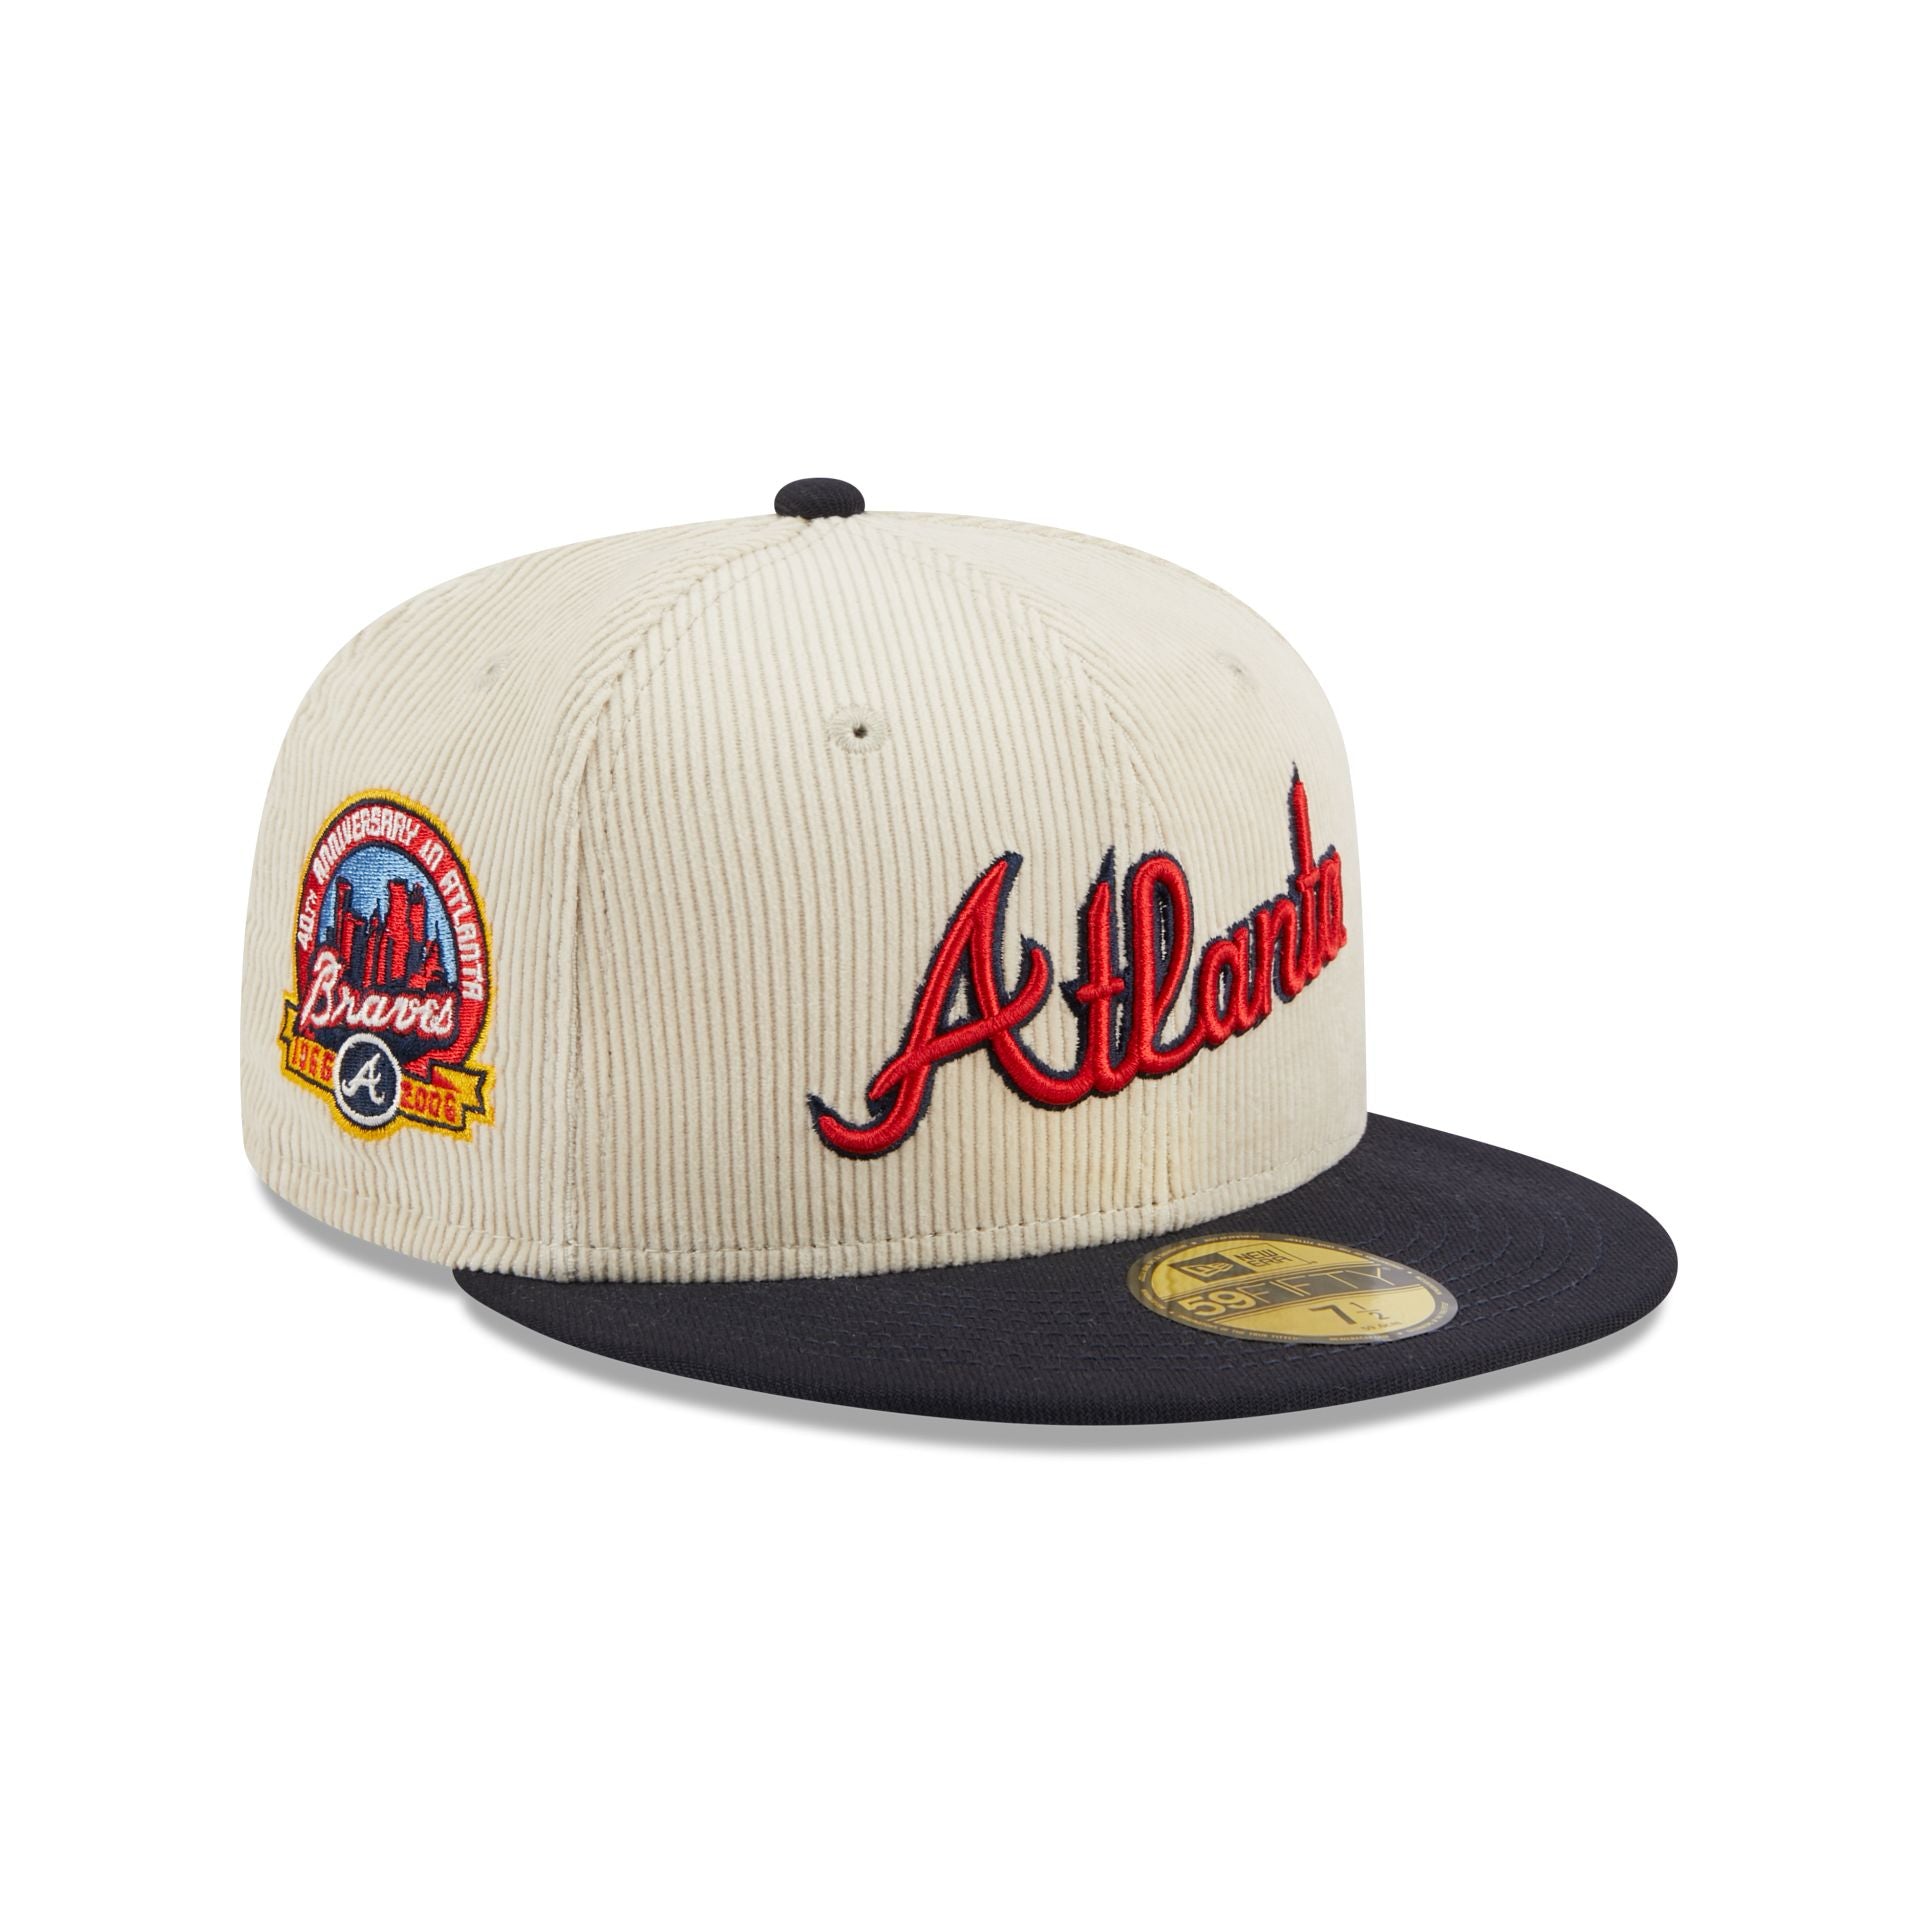 Official New Era Vintage Cord Atlanta Braves 59FIFTY Fitted Cap C102_102  C102_102 C102_102